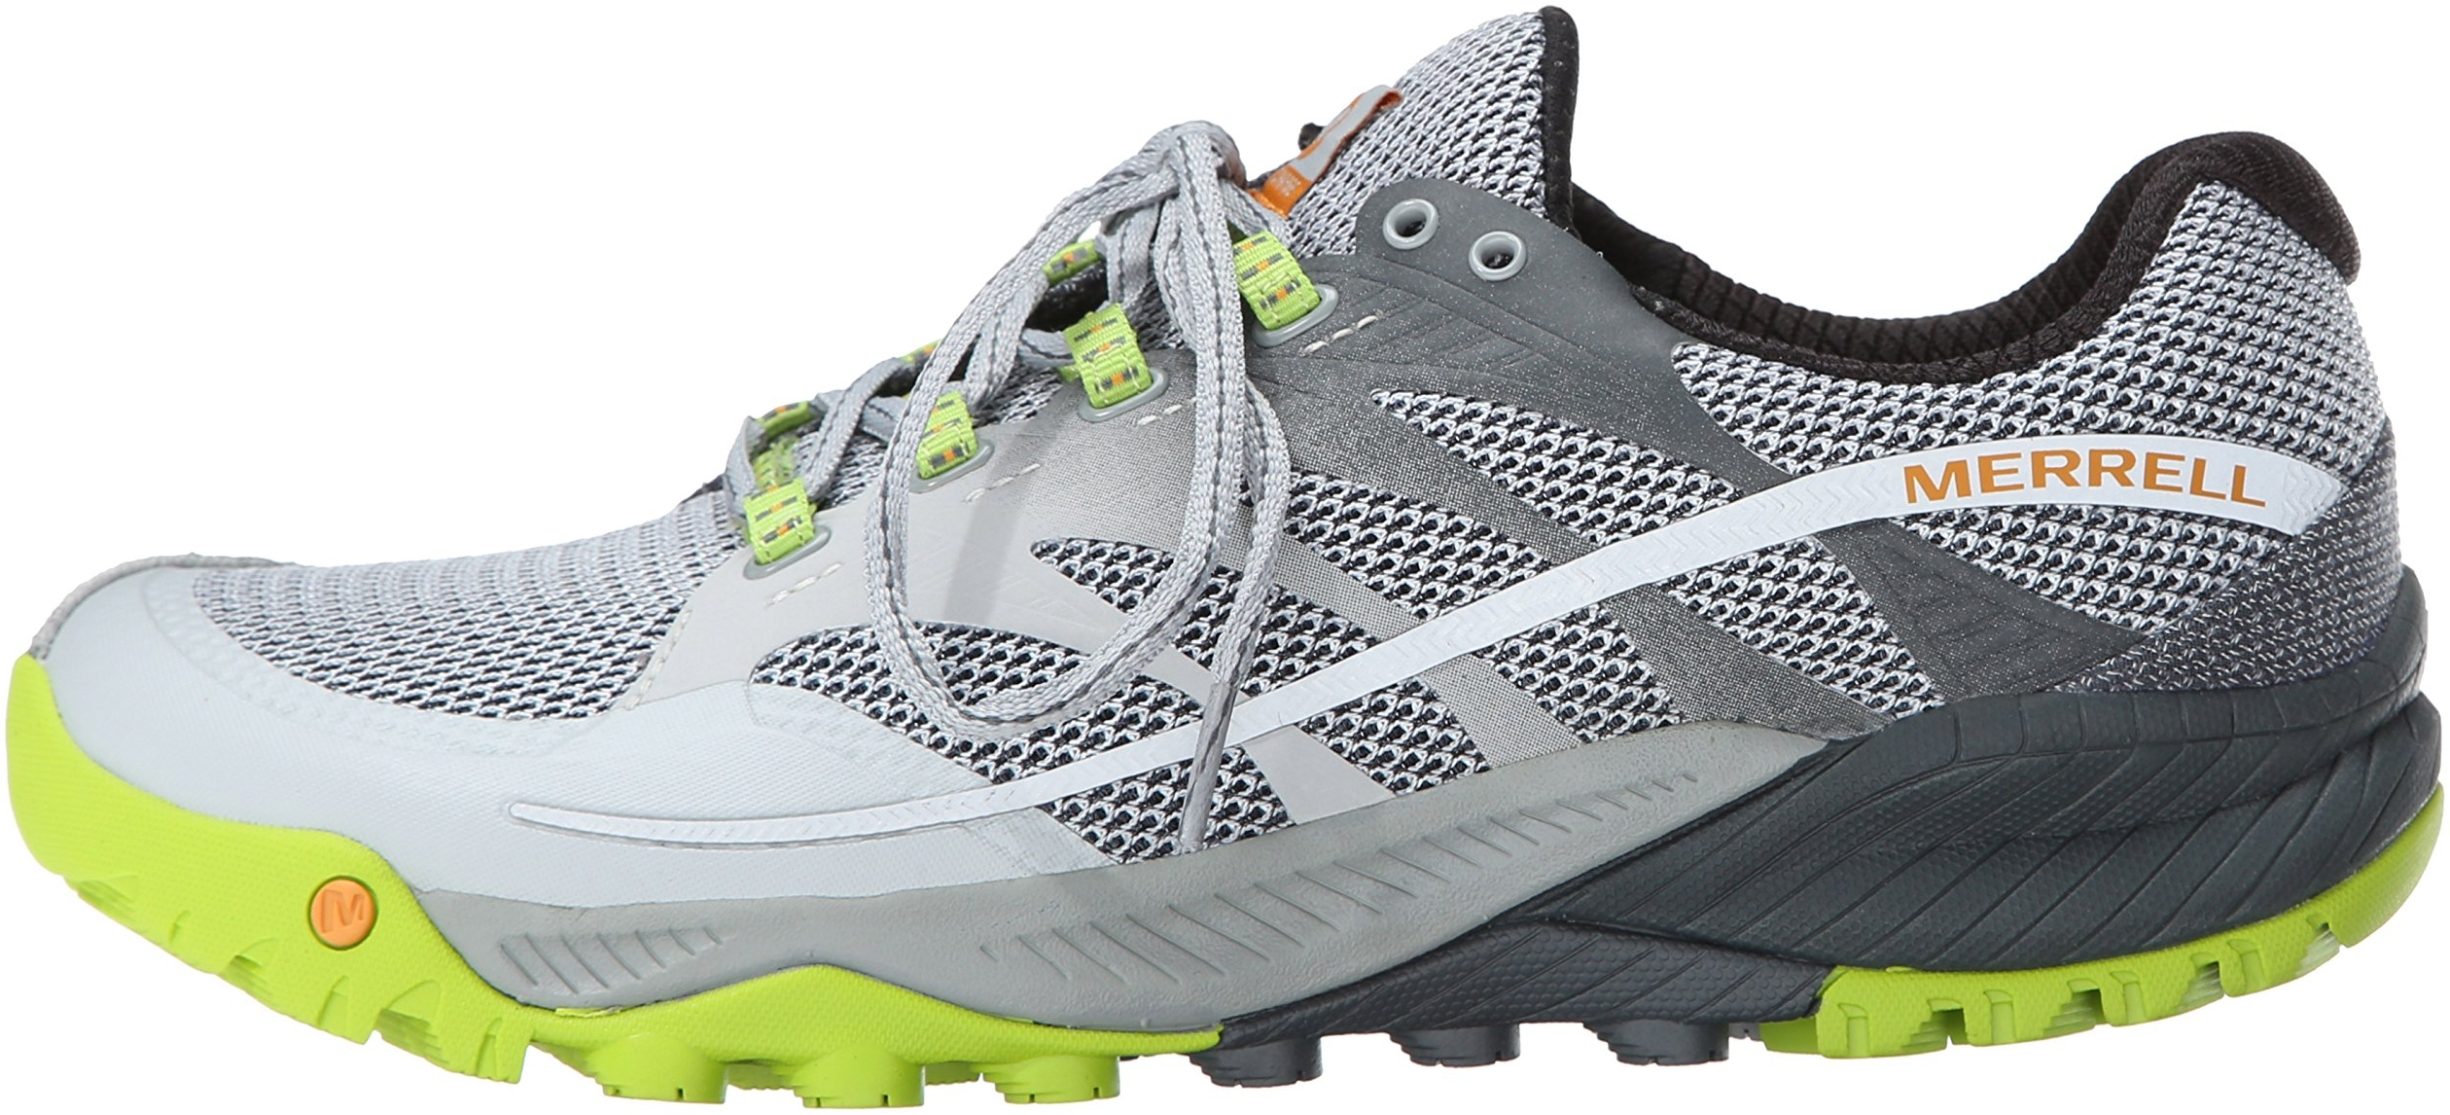 merrell all out charge gtx